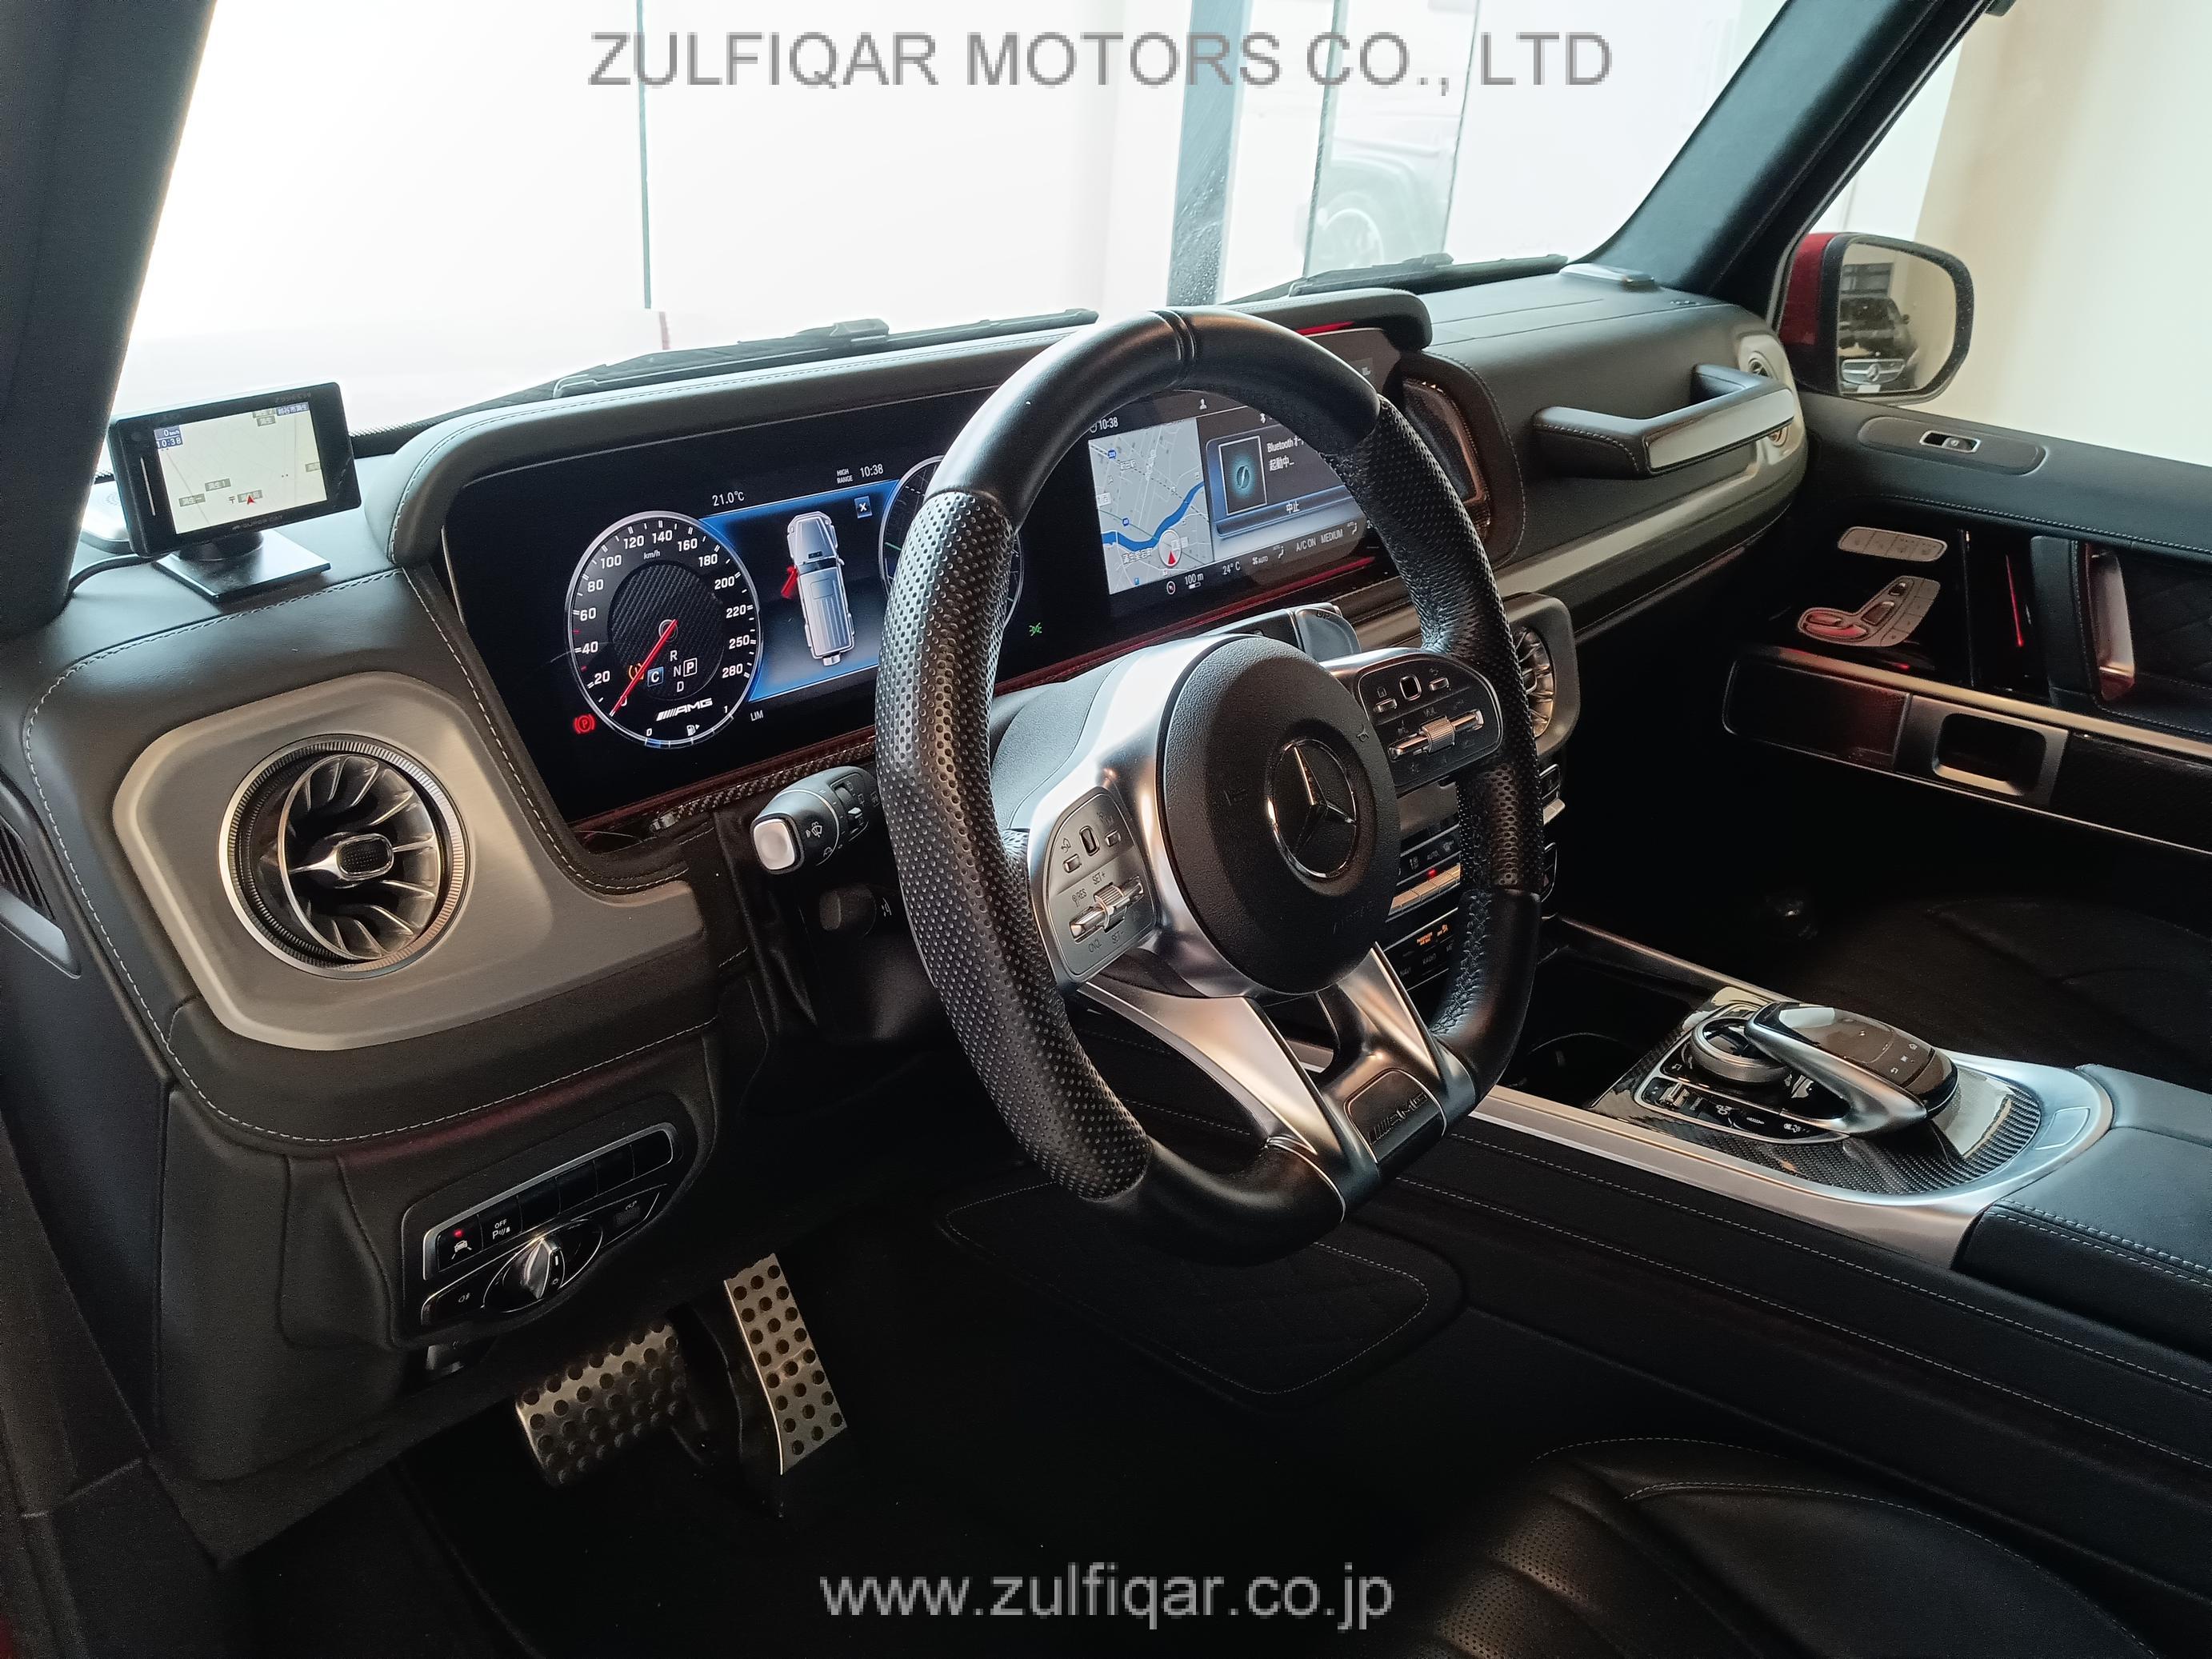 MERCEDES AMG G CLASS 2019 Image 48